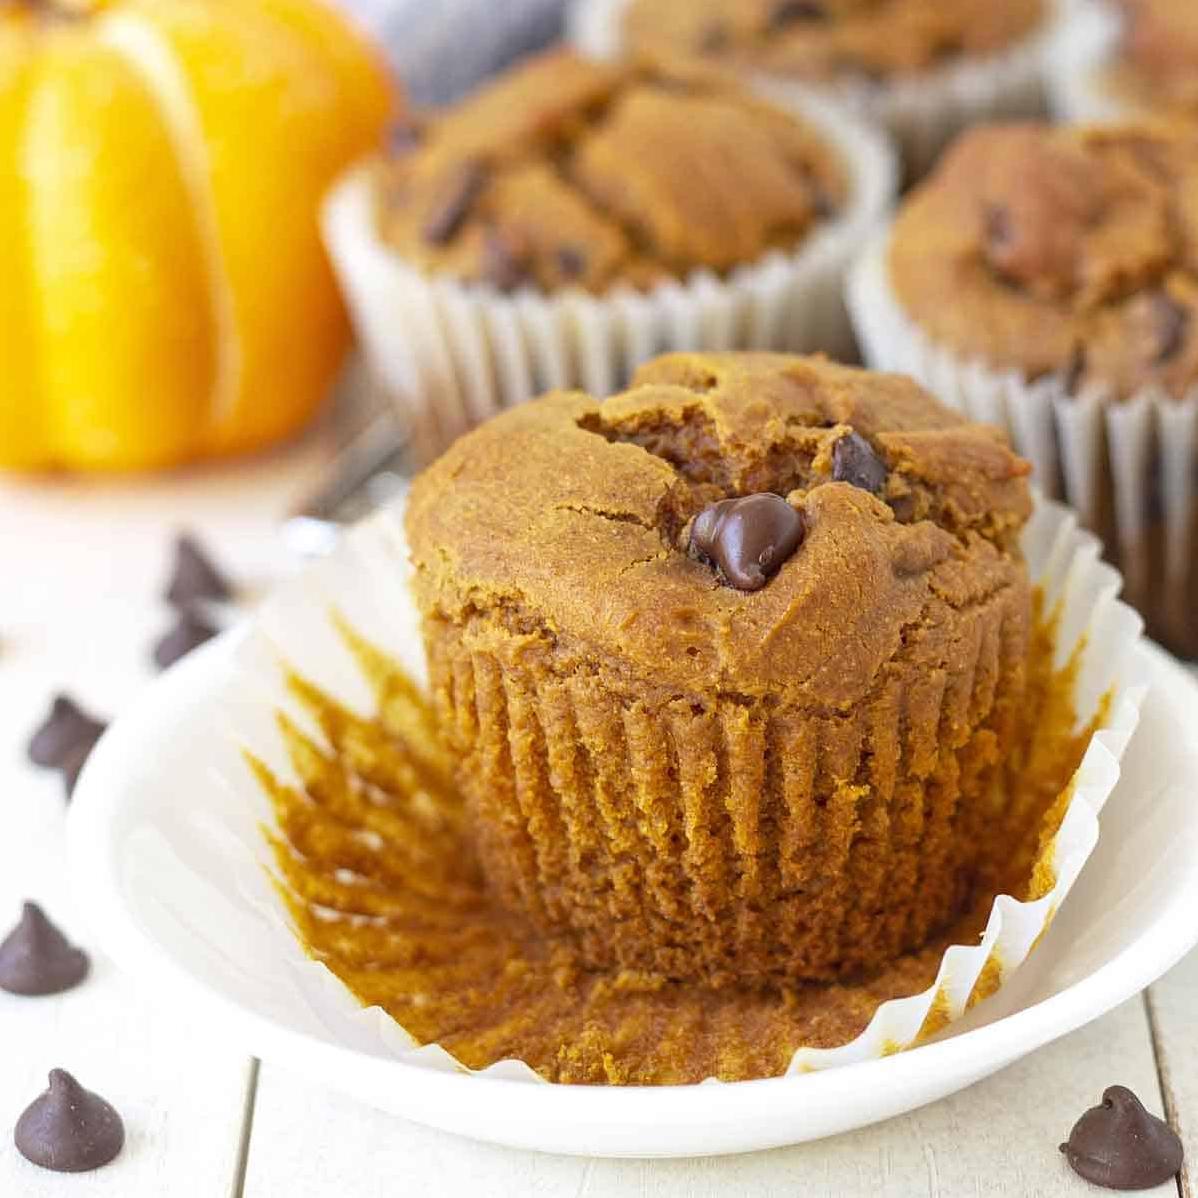  Get your pumpkin spice fix in these delicious muffins